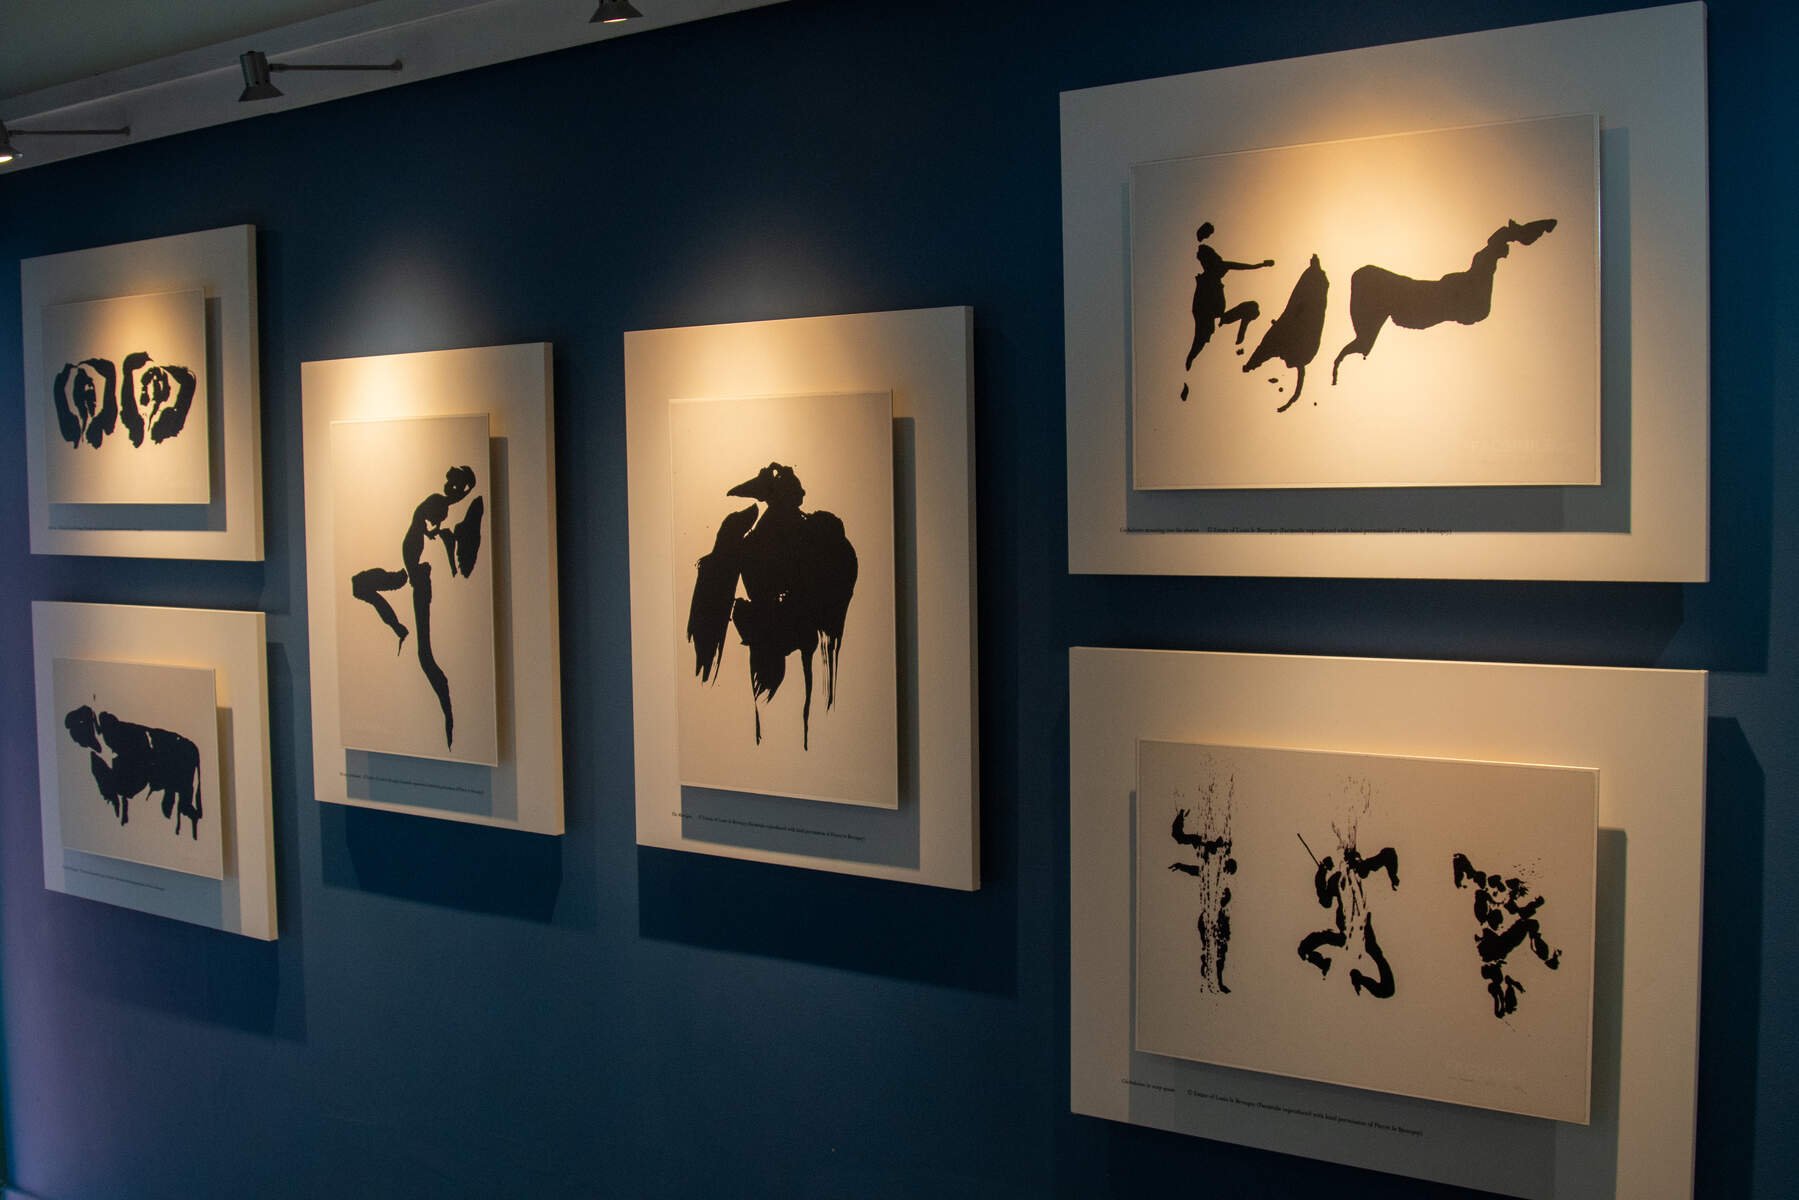 A blue wall with white picture frames showcasing ancient art drawings in black